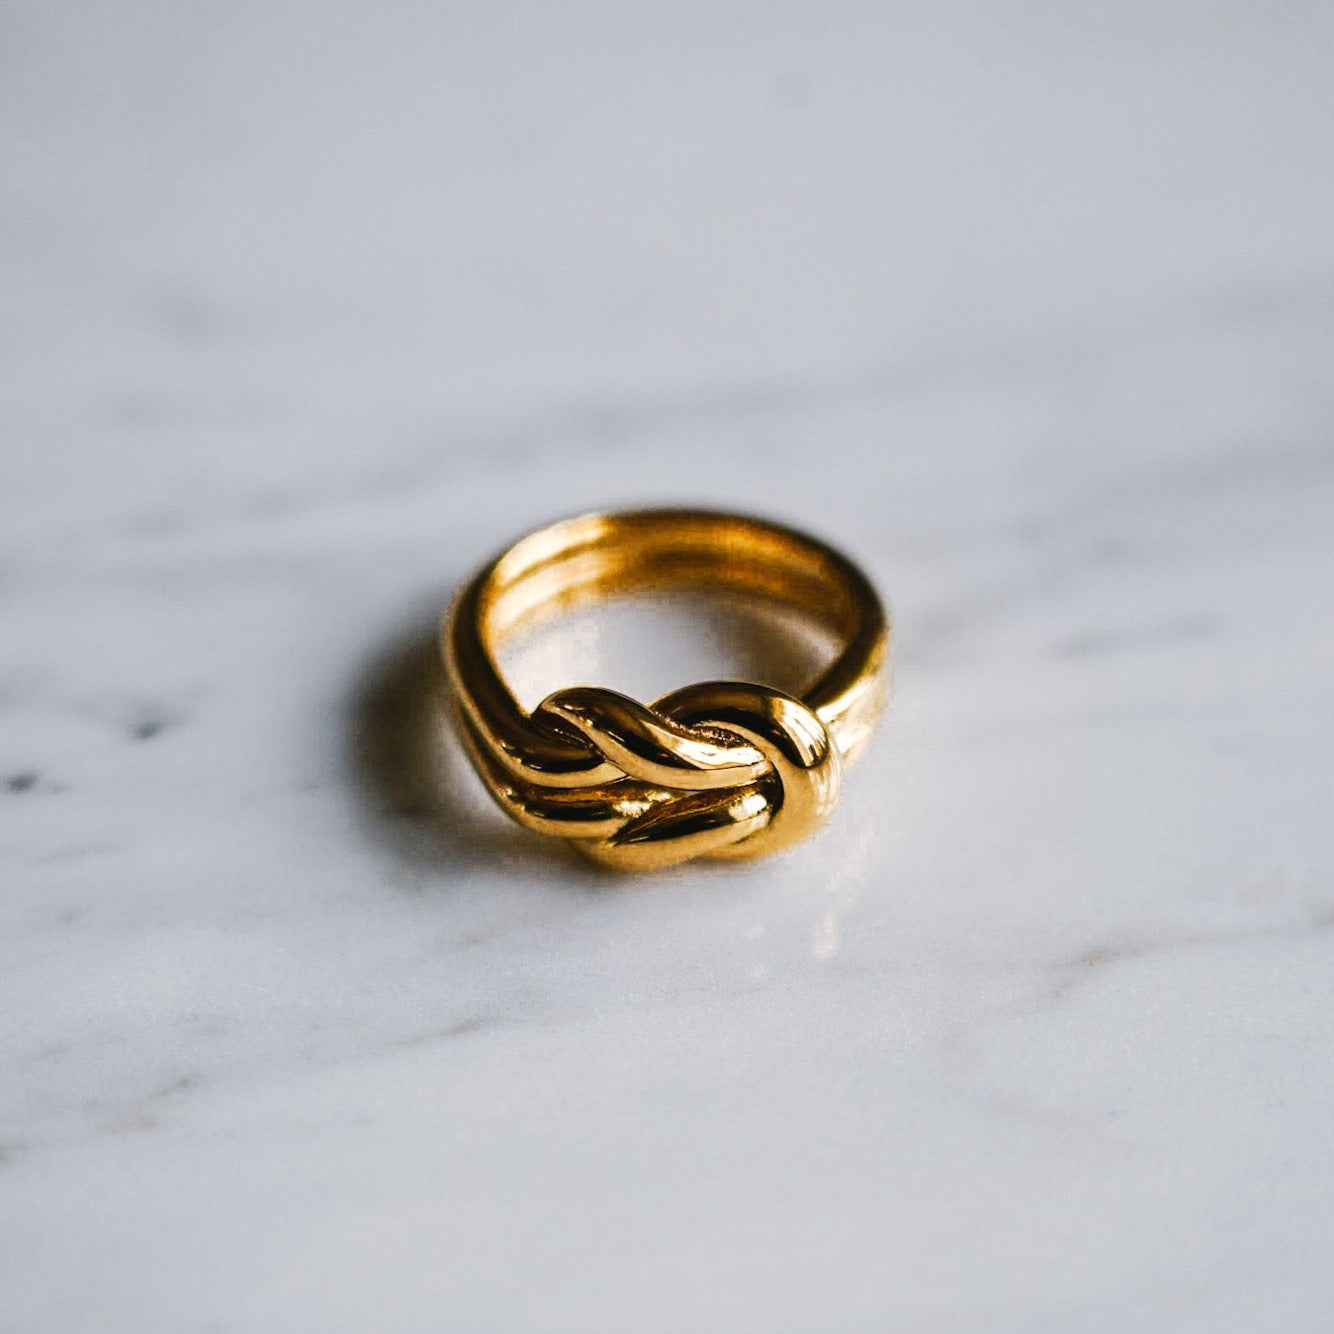 Perpetual band ring - Gold-toned